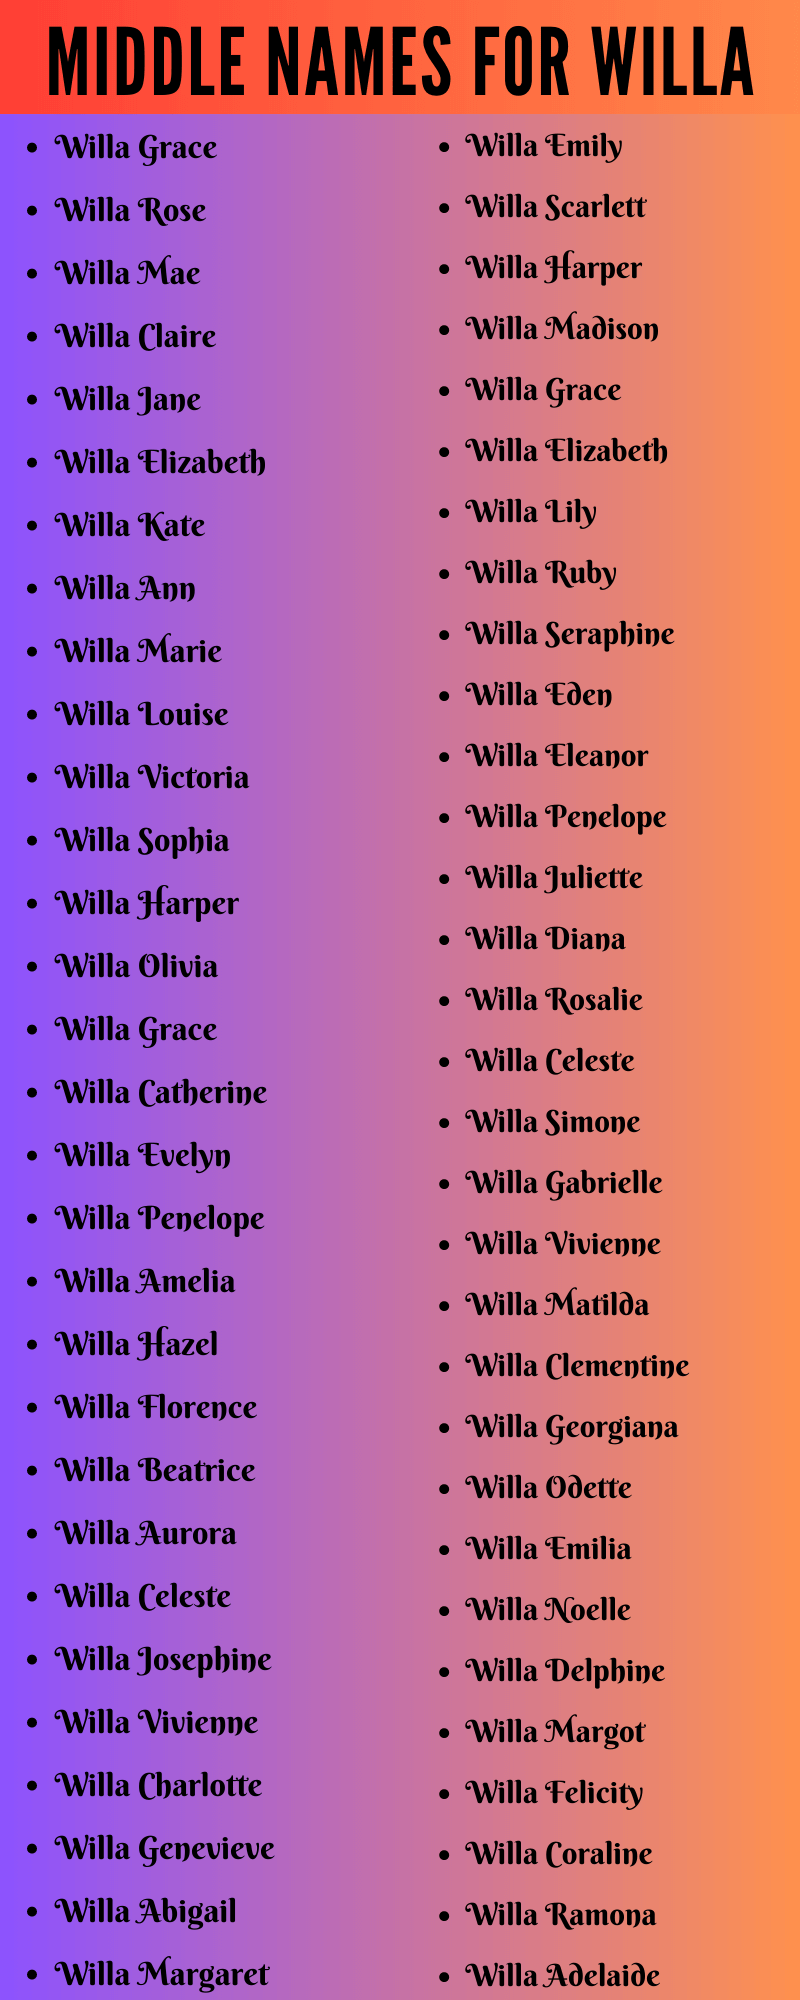 400 Cute Middle Names For Willa